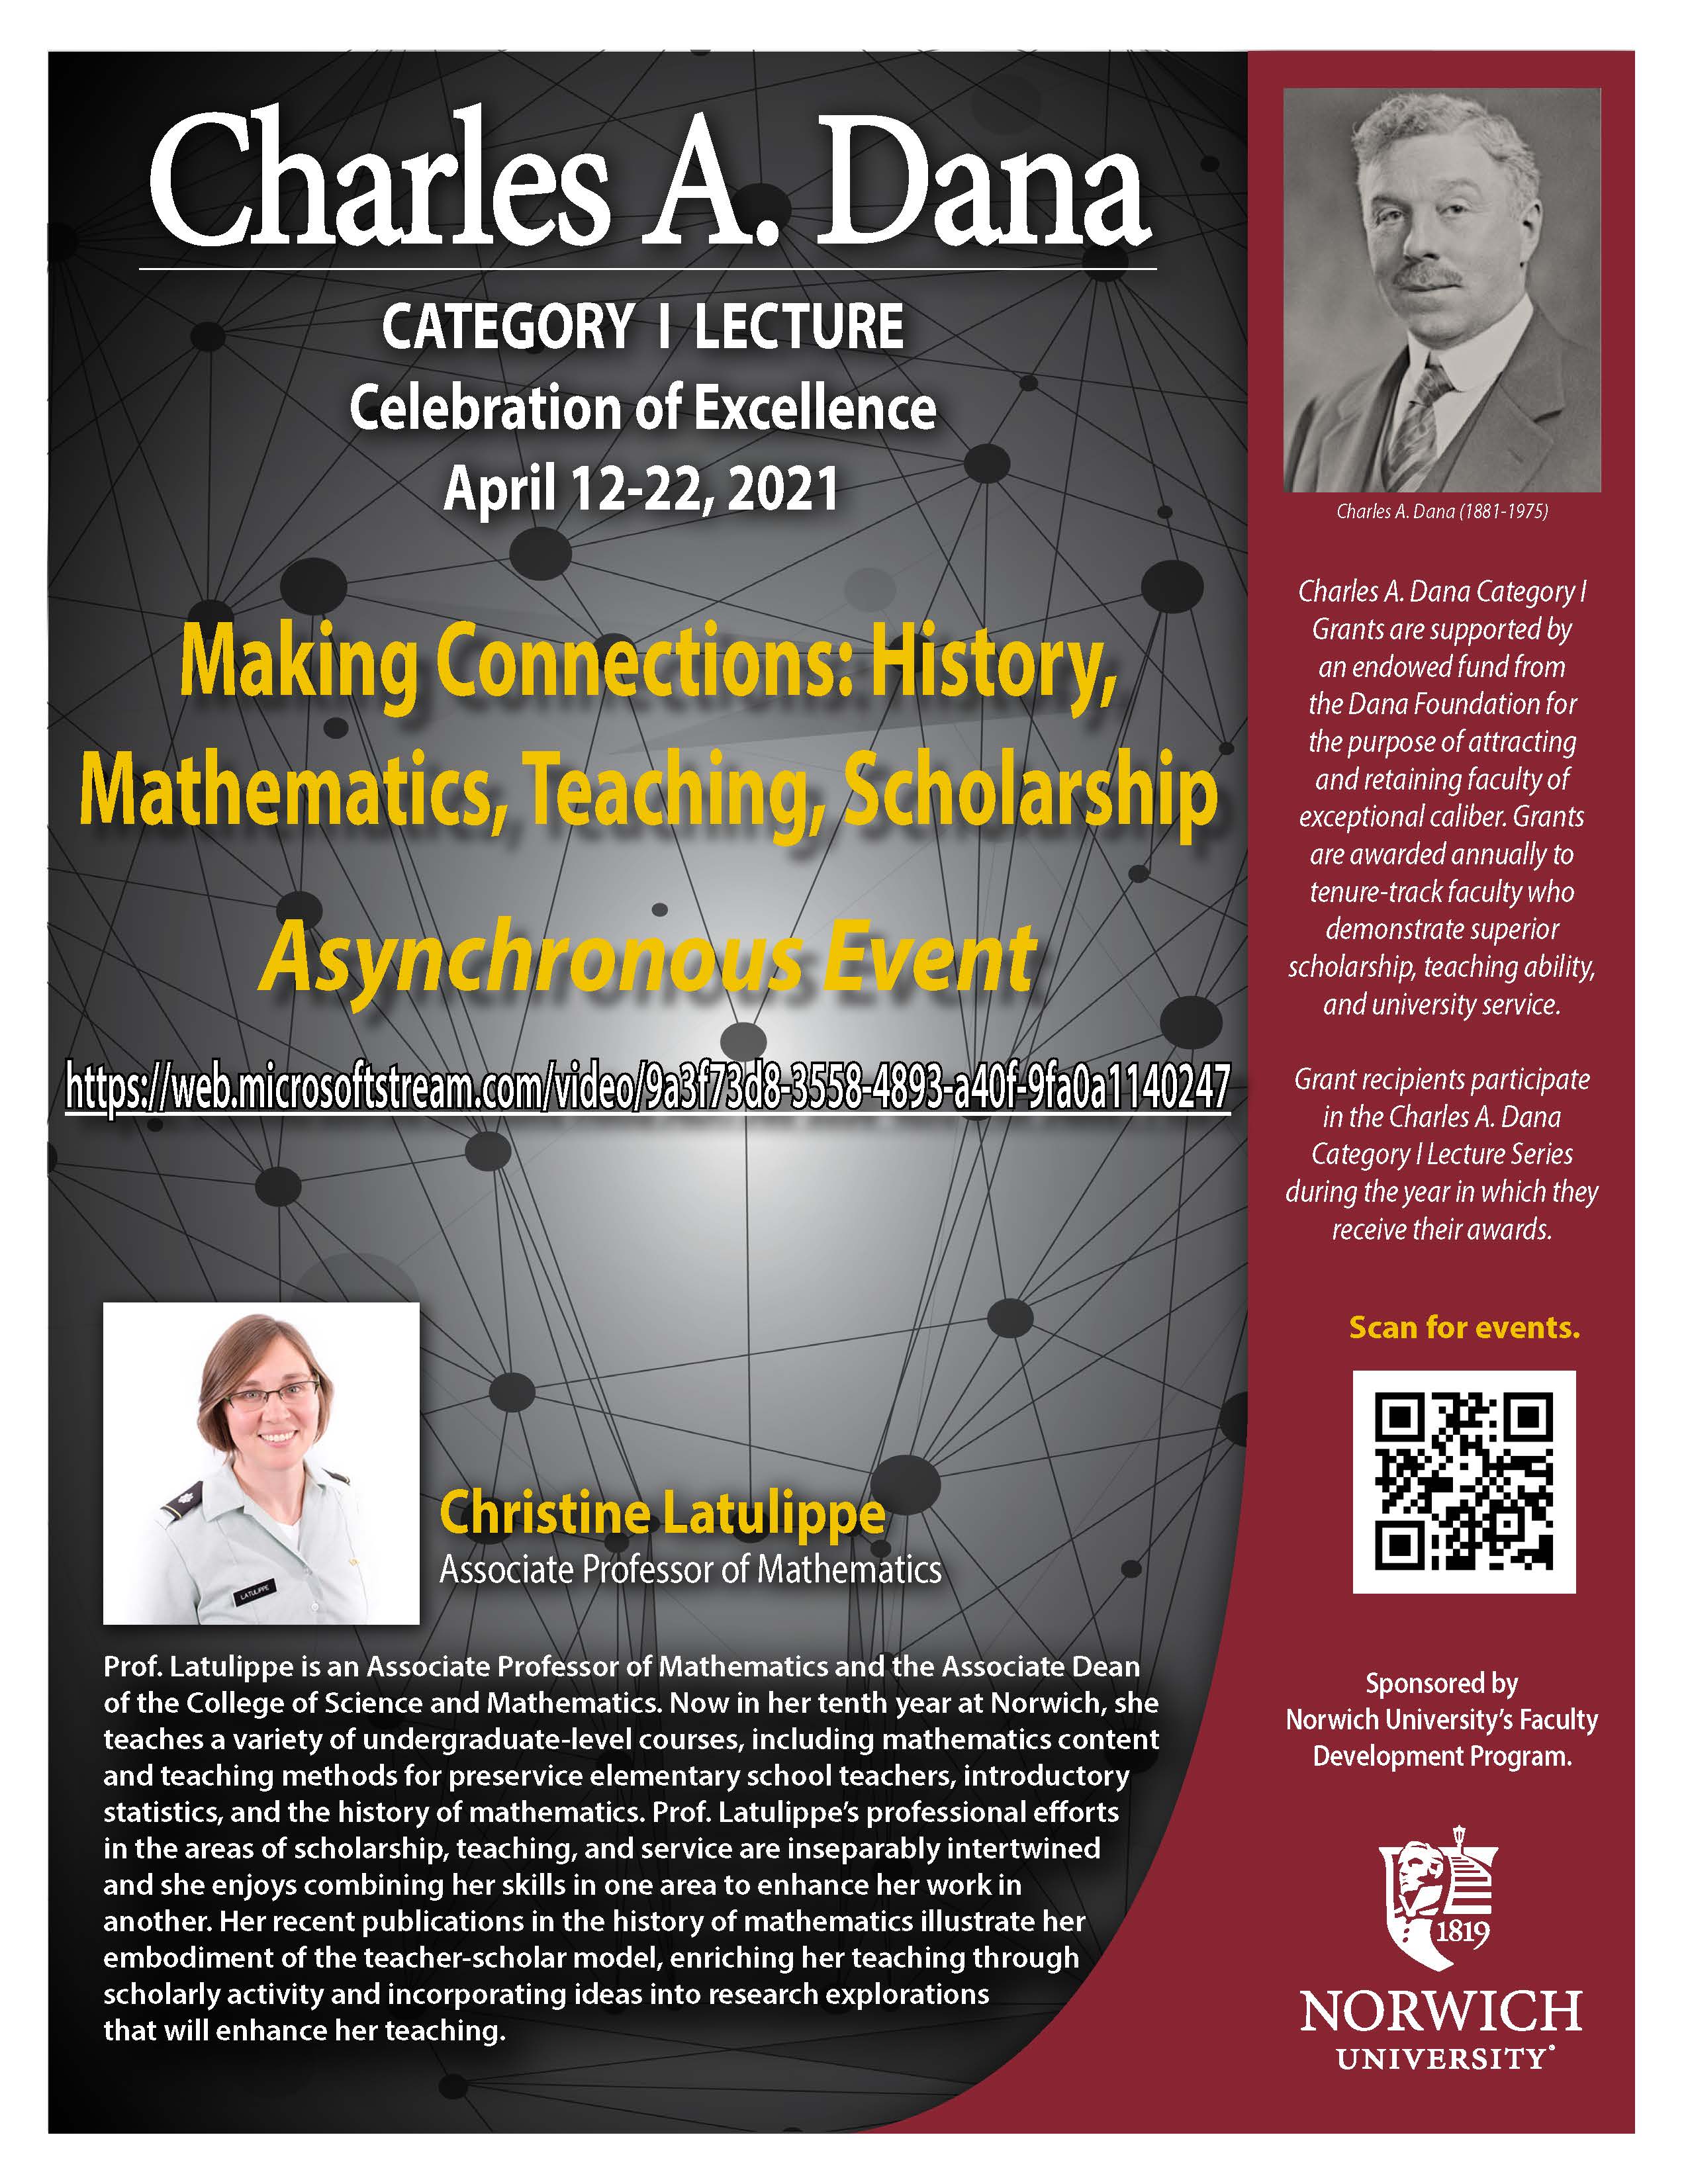 Showcase Image for Making Connections: History, Mathematics, Teaching, Scholarship